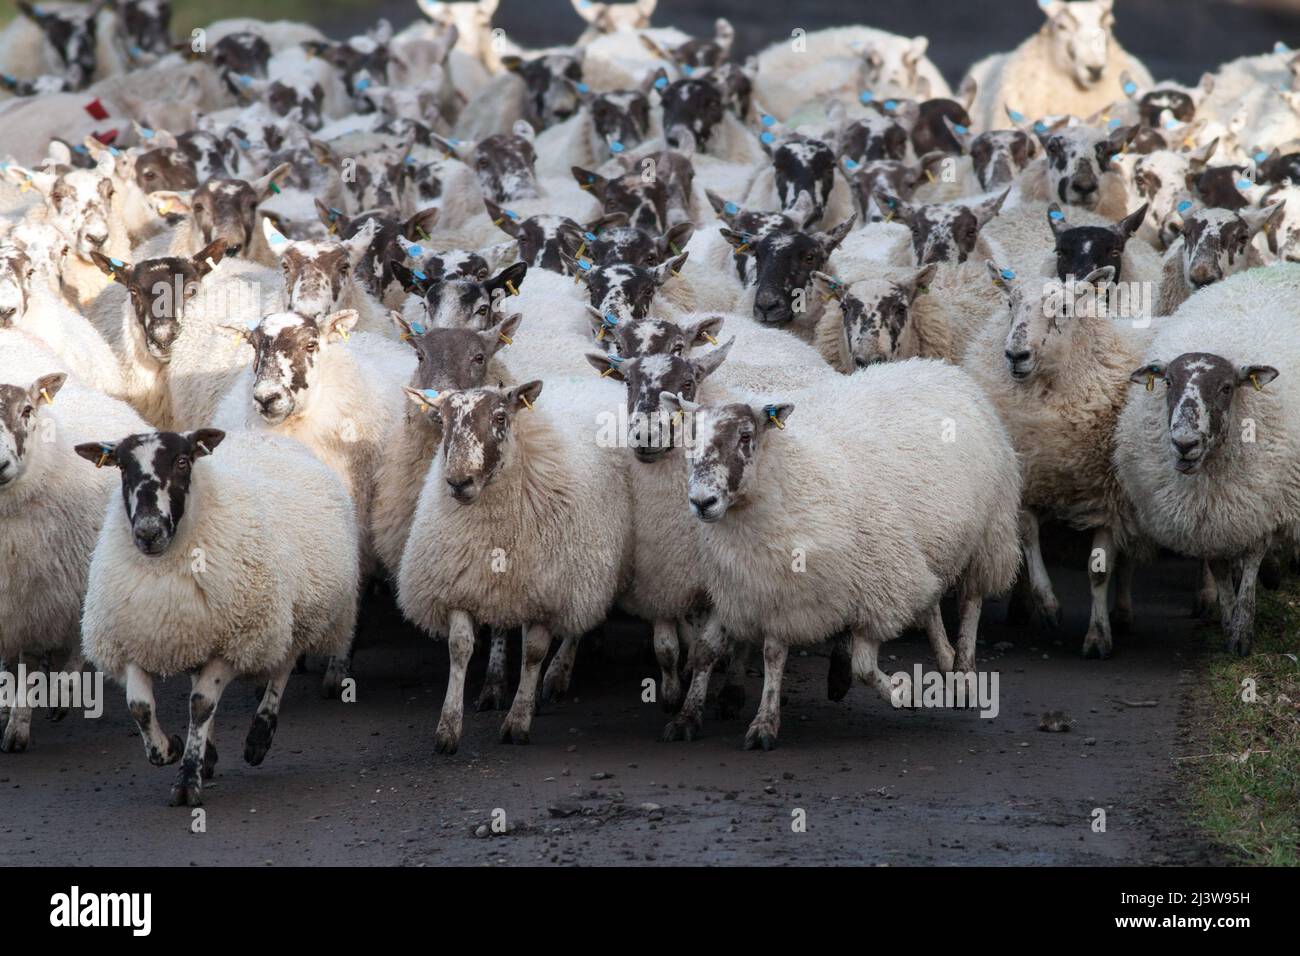 Flock of sheep running in a field Stock Photo